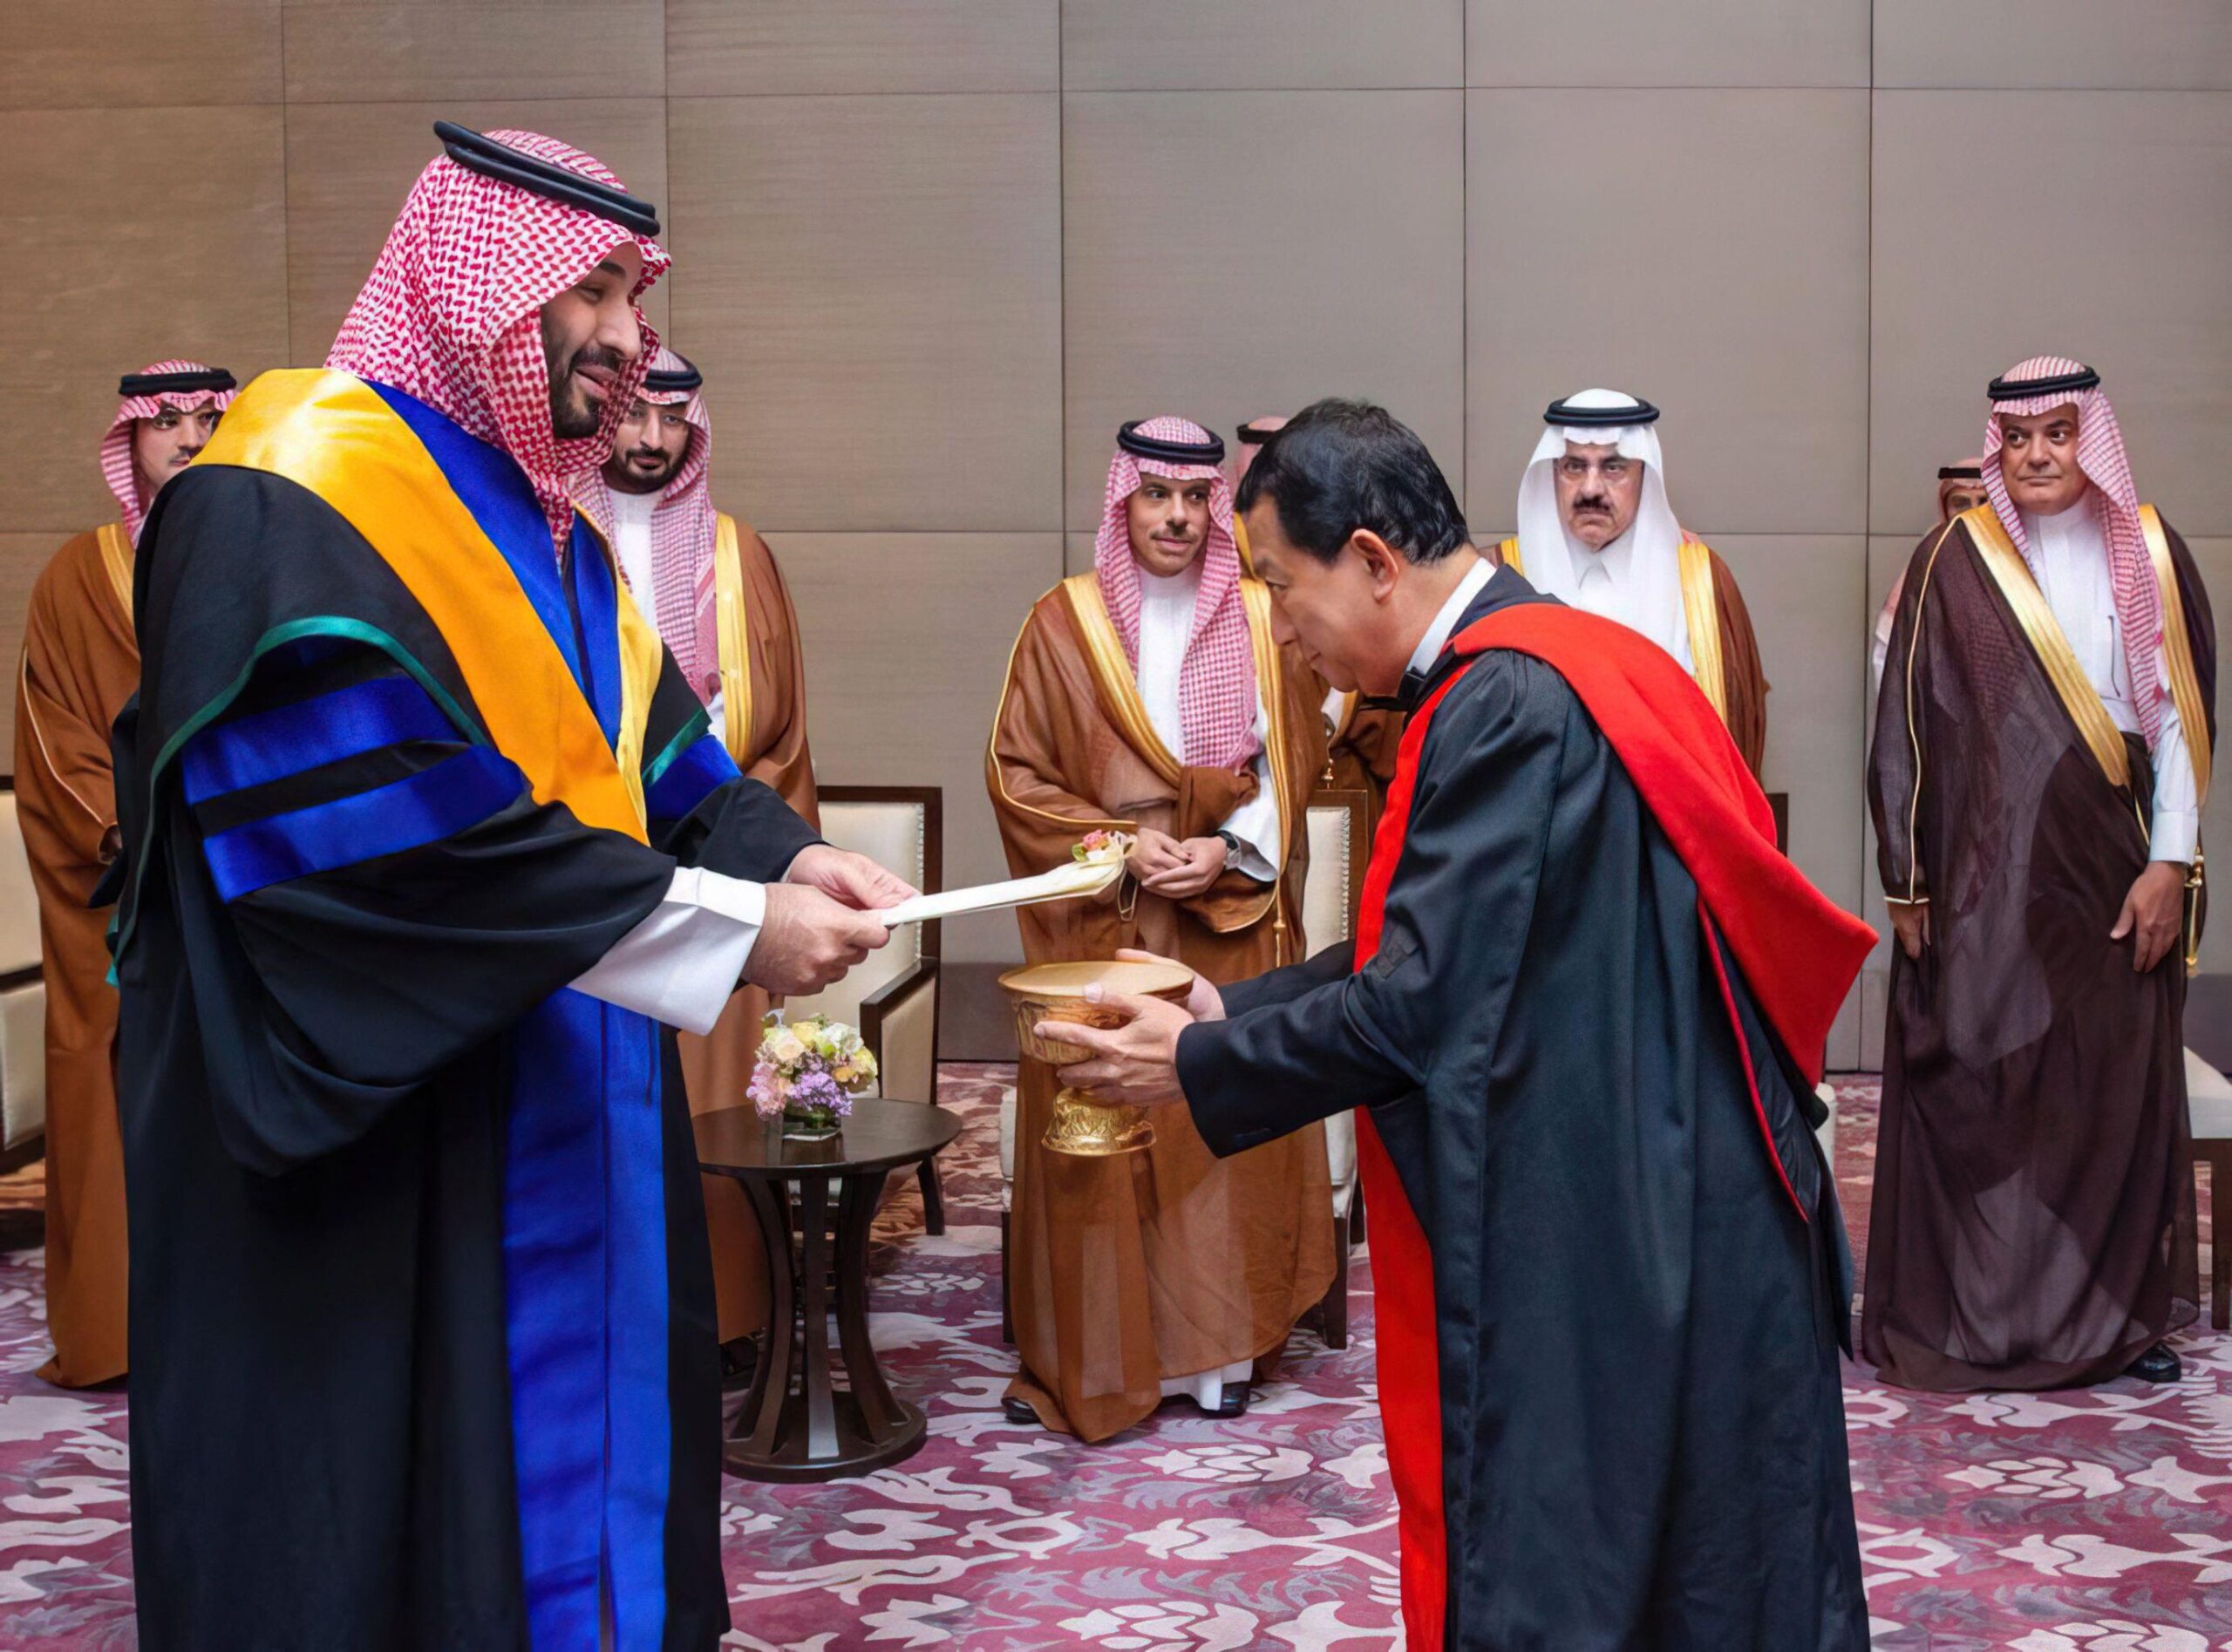 Bangkok, Thailand, on November 18, 2022. Saudi Crown Prince Mohammed bin Salman receives an honorary doctorate degree in the field of ‘land knowledge for sustainable development’ from Kasetsart University, in Bangkok, Thailand, on November 18, 2022. Photo by Balkis Press/ABACAPRESS.COM